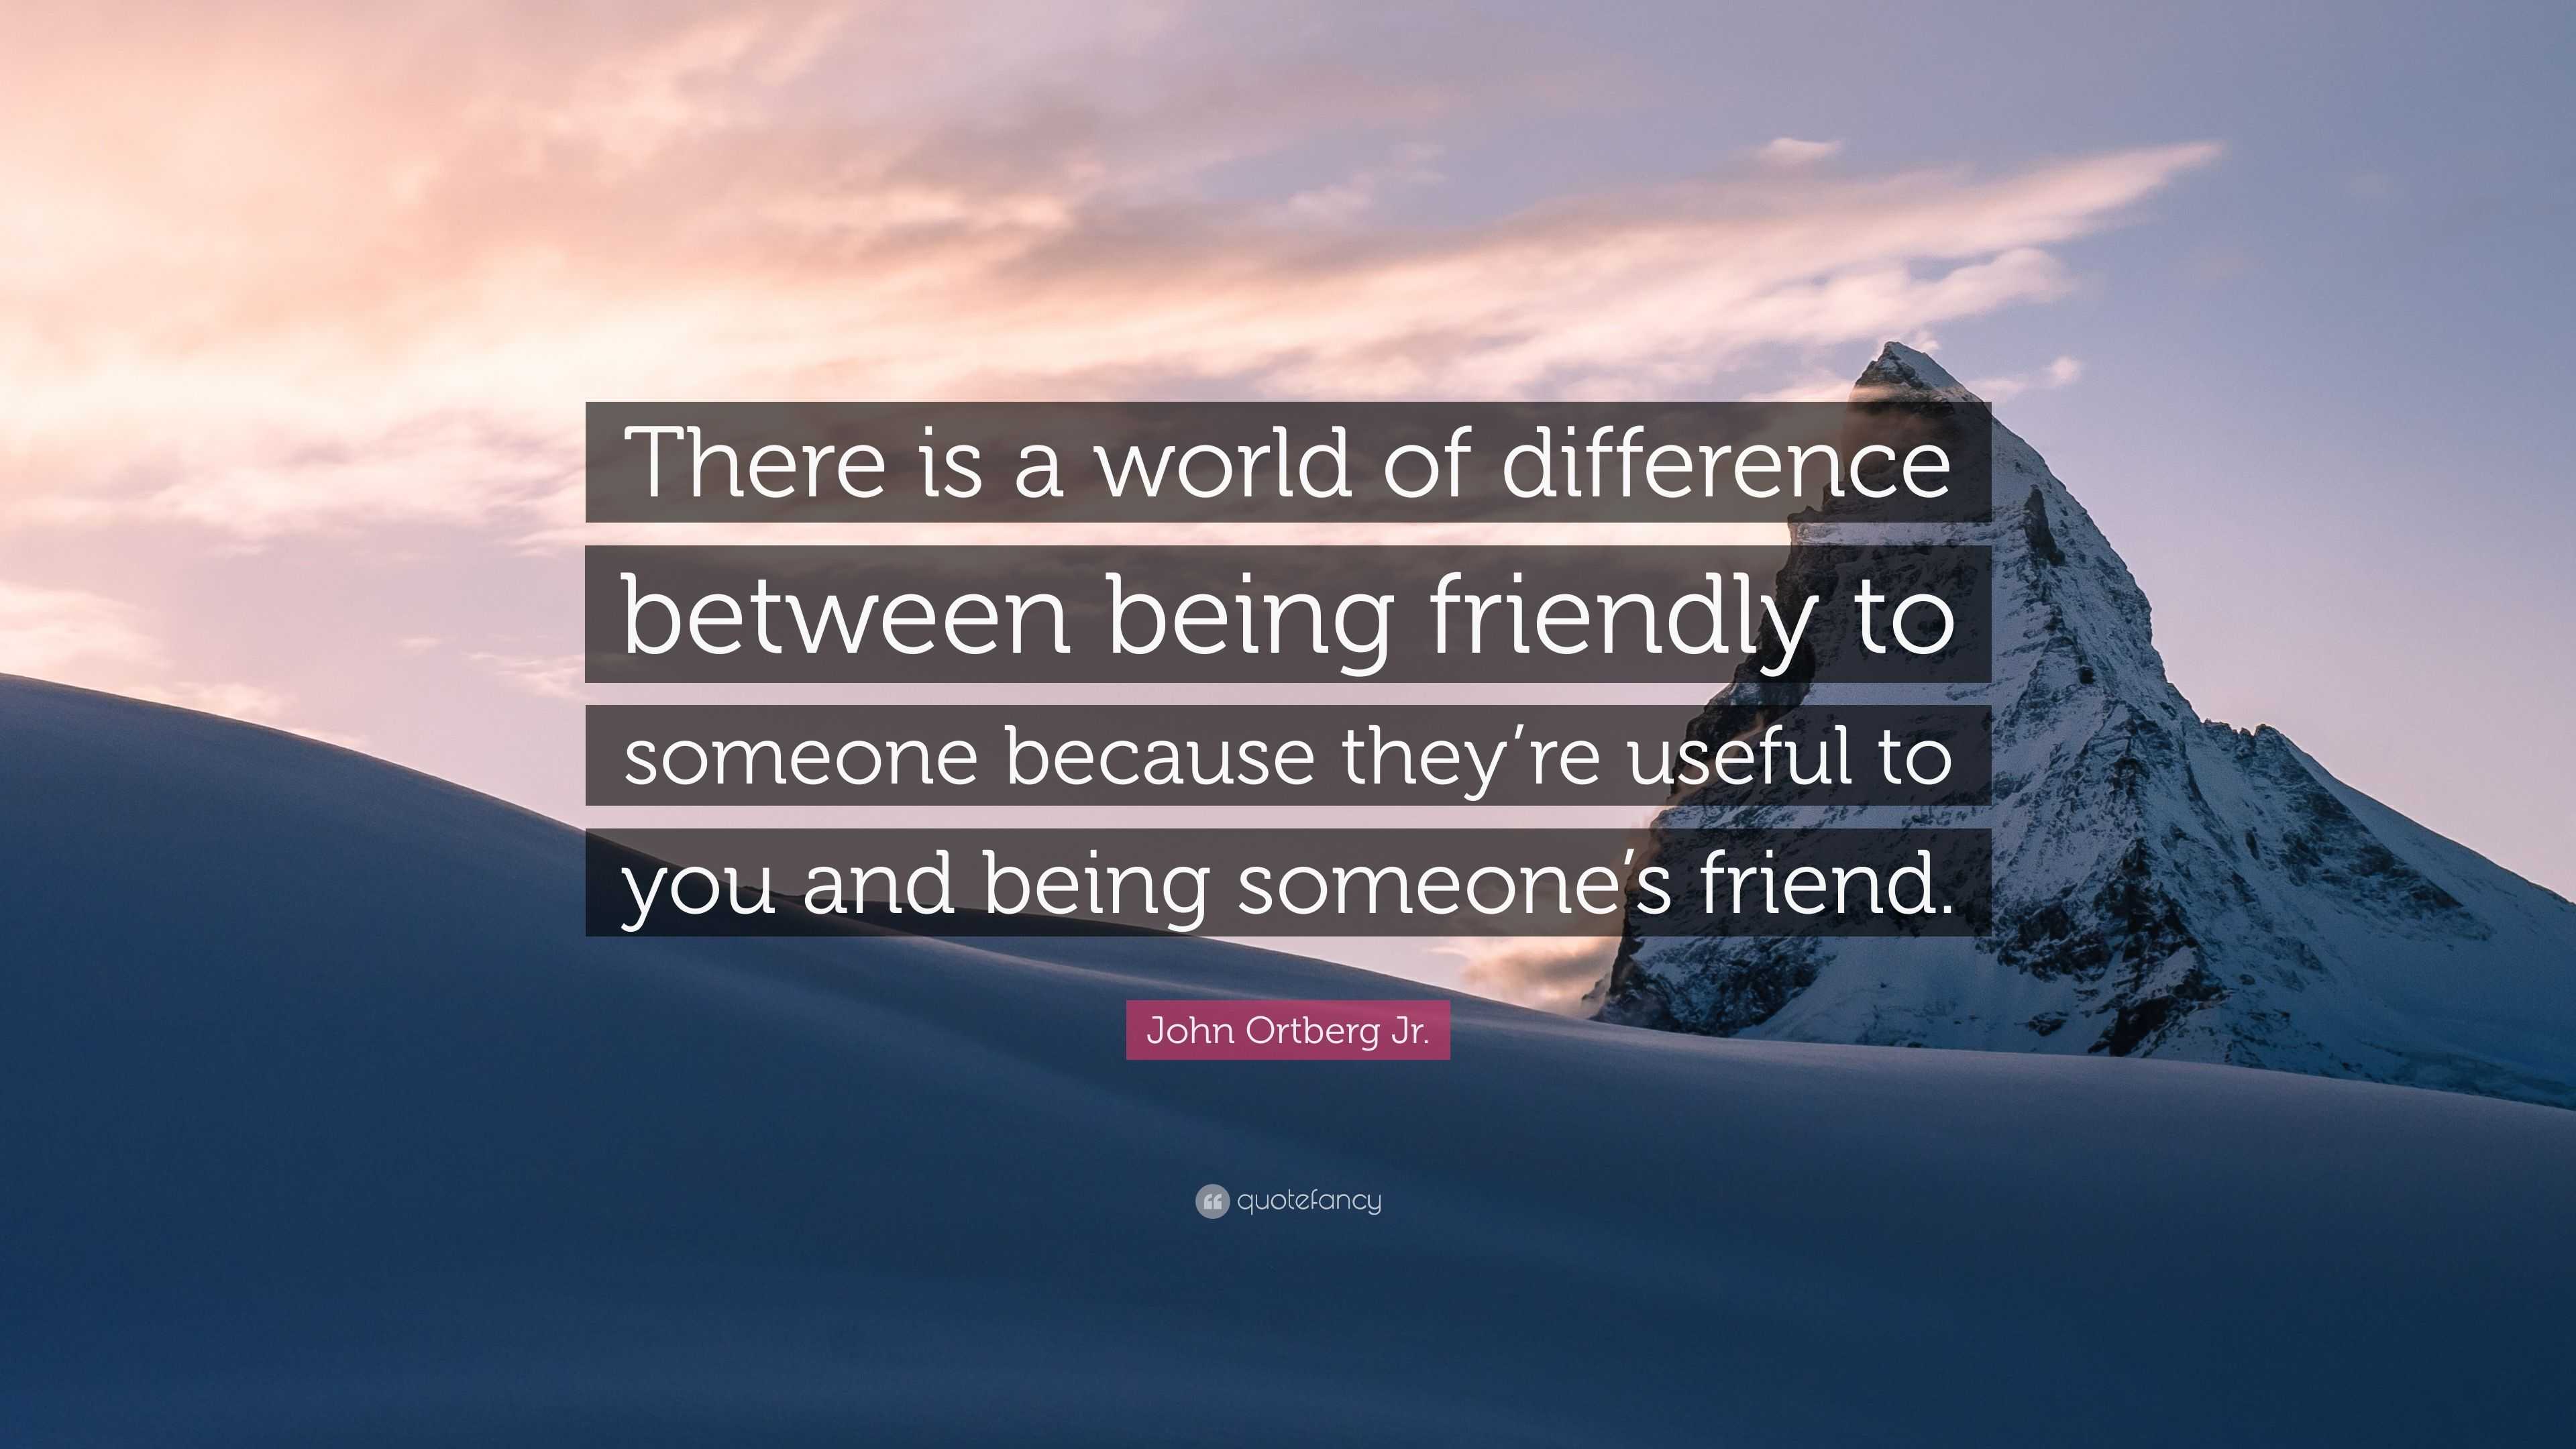 What is the difference between being friendly and friendship